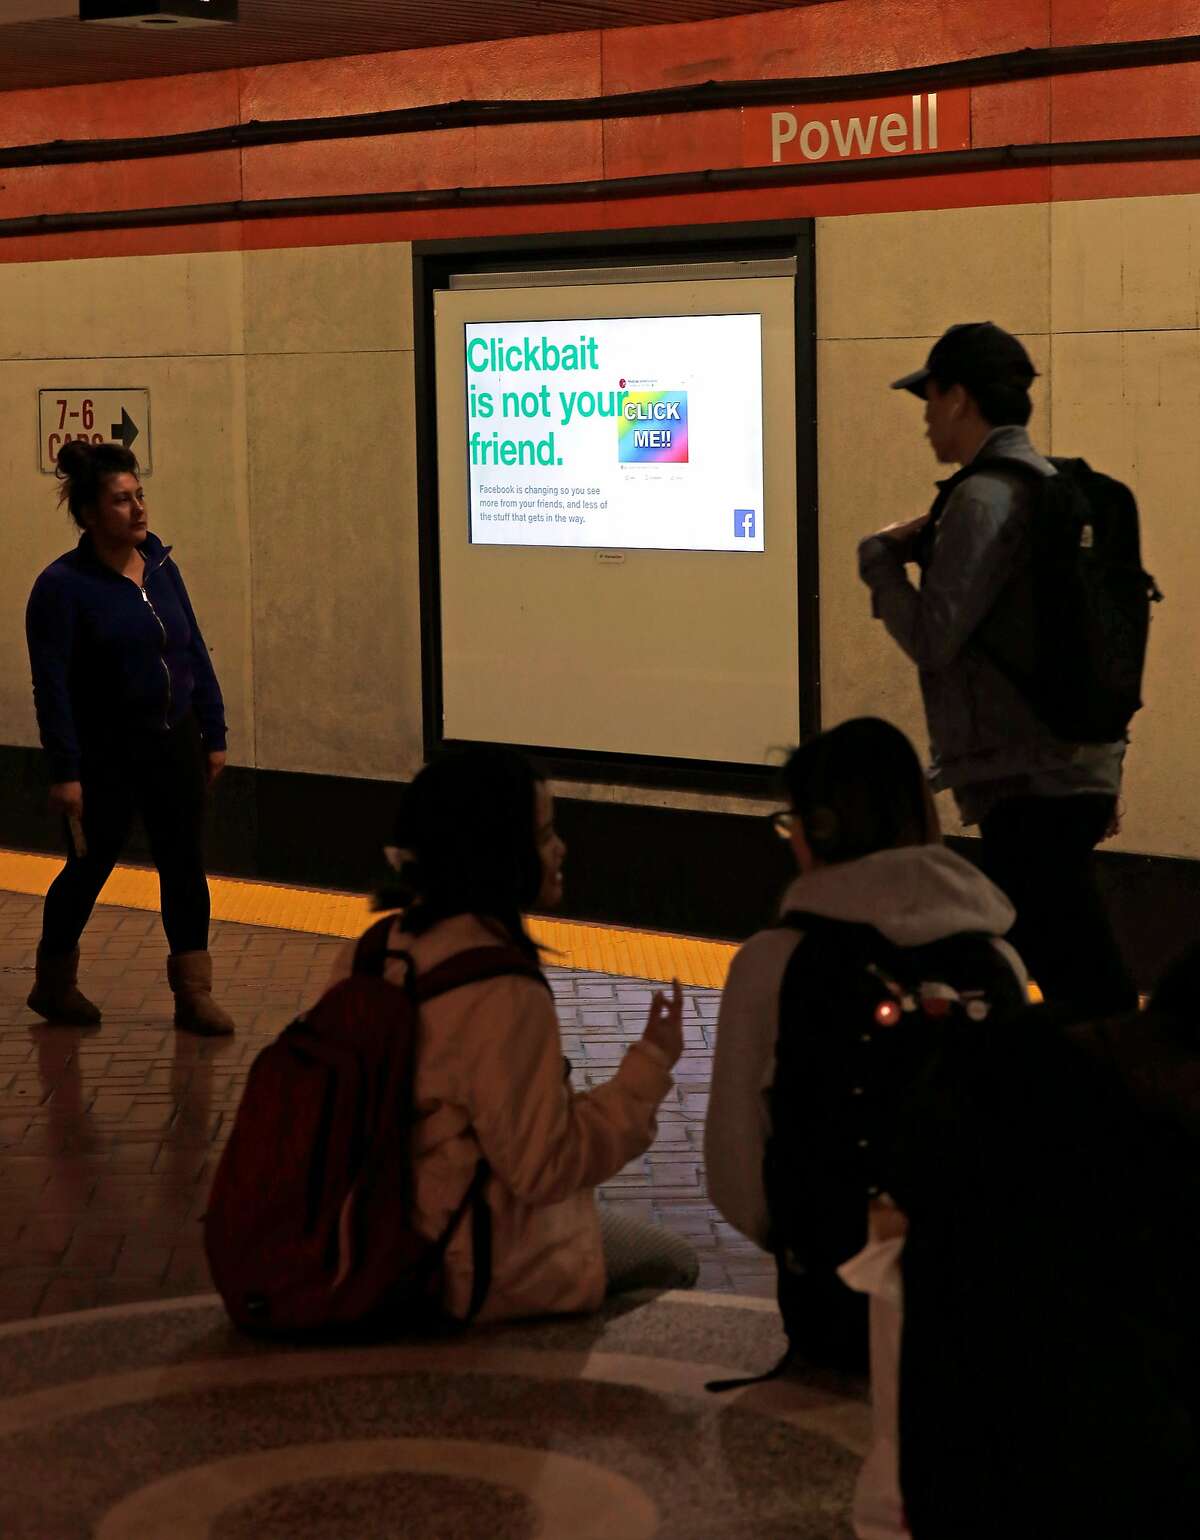 Facebook is running scrolling ads for their company on the train platform video screens at the Powell street BART station in San Francisco, Ca., as seen on Thurs. May 24, 2018.